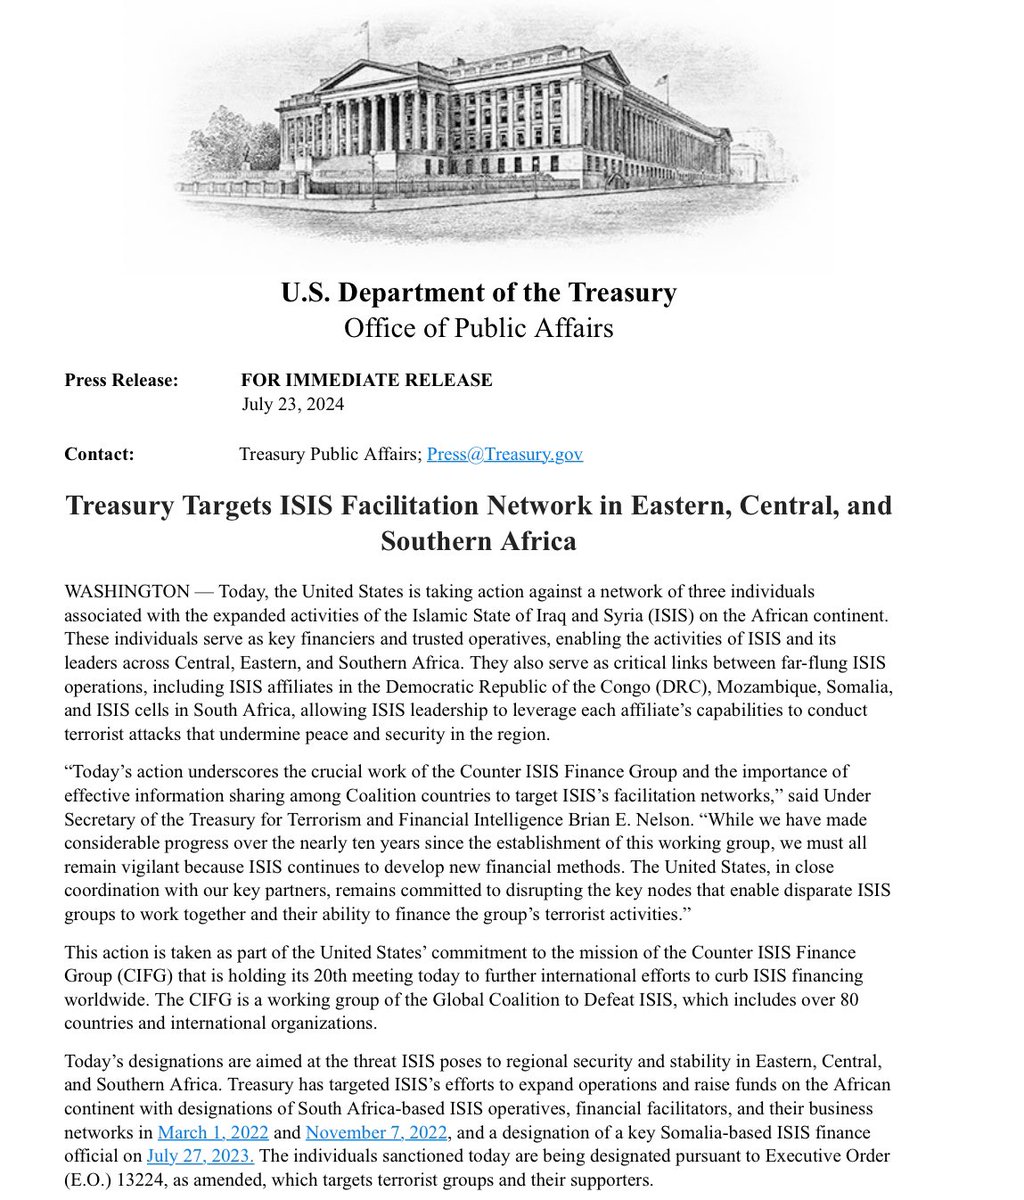 New U.S. Sanctions Target ISIS Facilitation Network in Eastern, Central, and Southern Africa